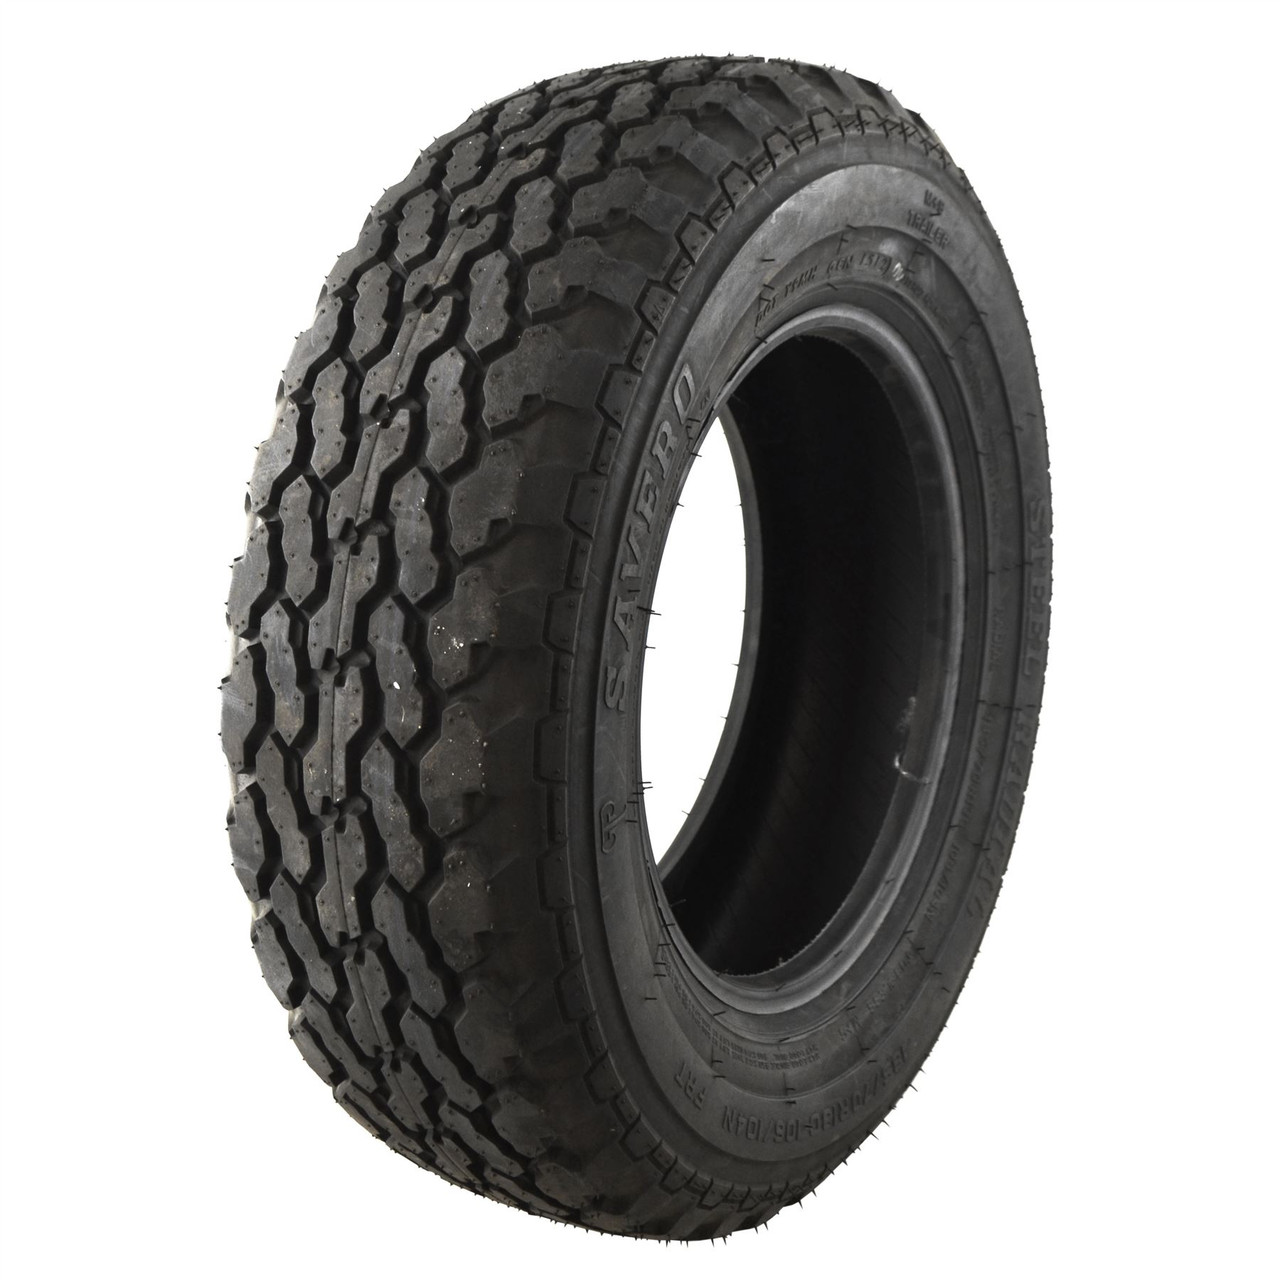 185/70 R13  Trailer Tyre Tire Only 106/104N Radial Tubeless 950kg Max TRSP24